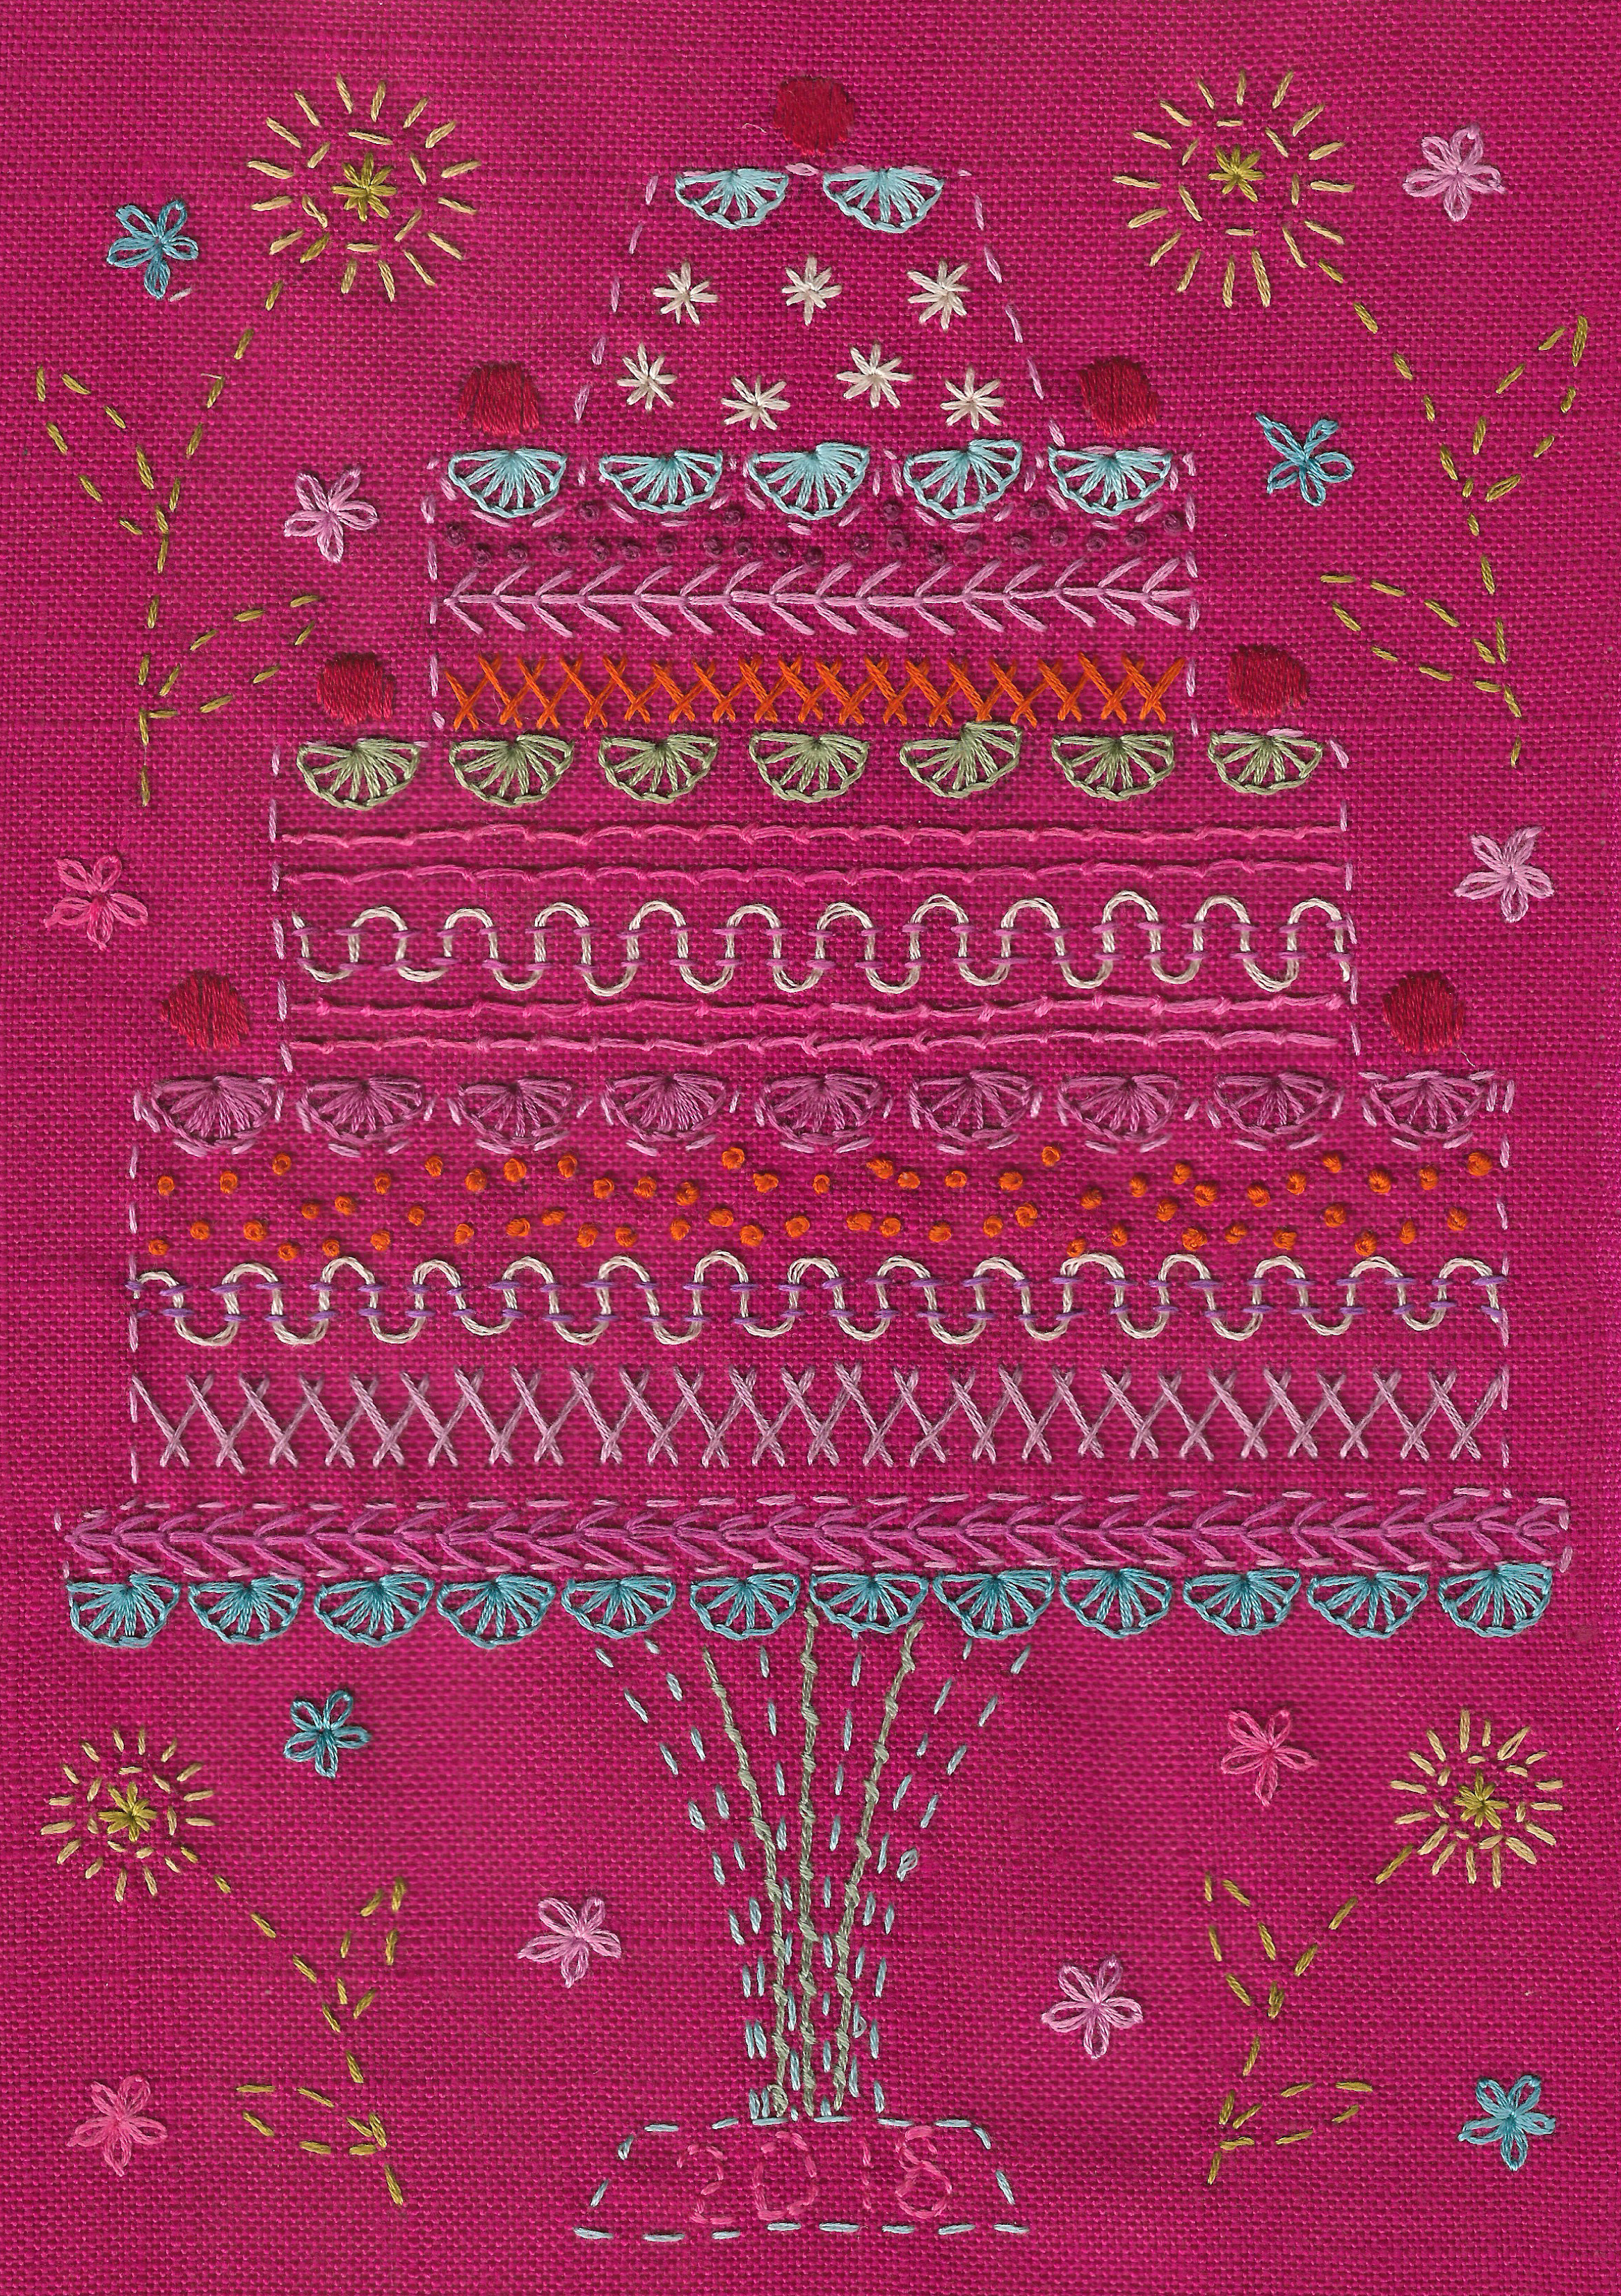 Transfer Embroidery Pattern Cake Iron On Transfer Embroidery Pattern